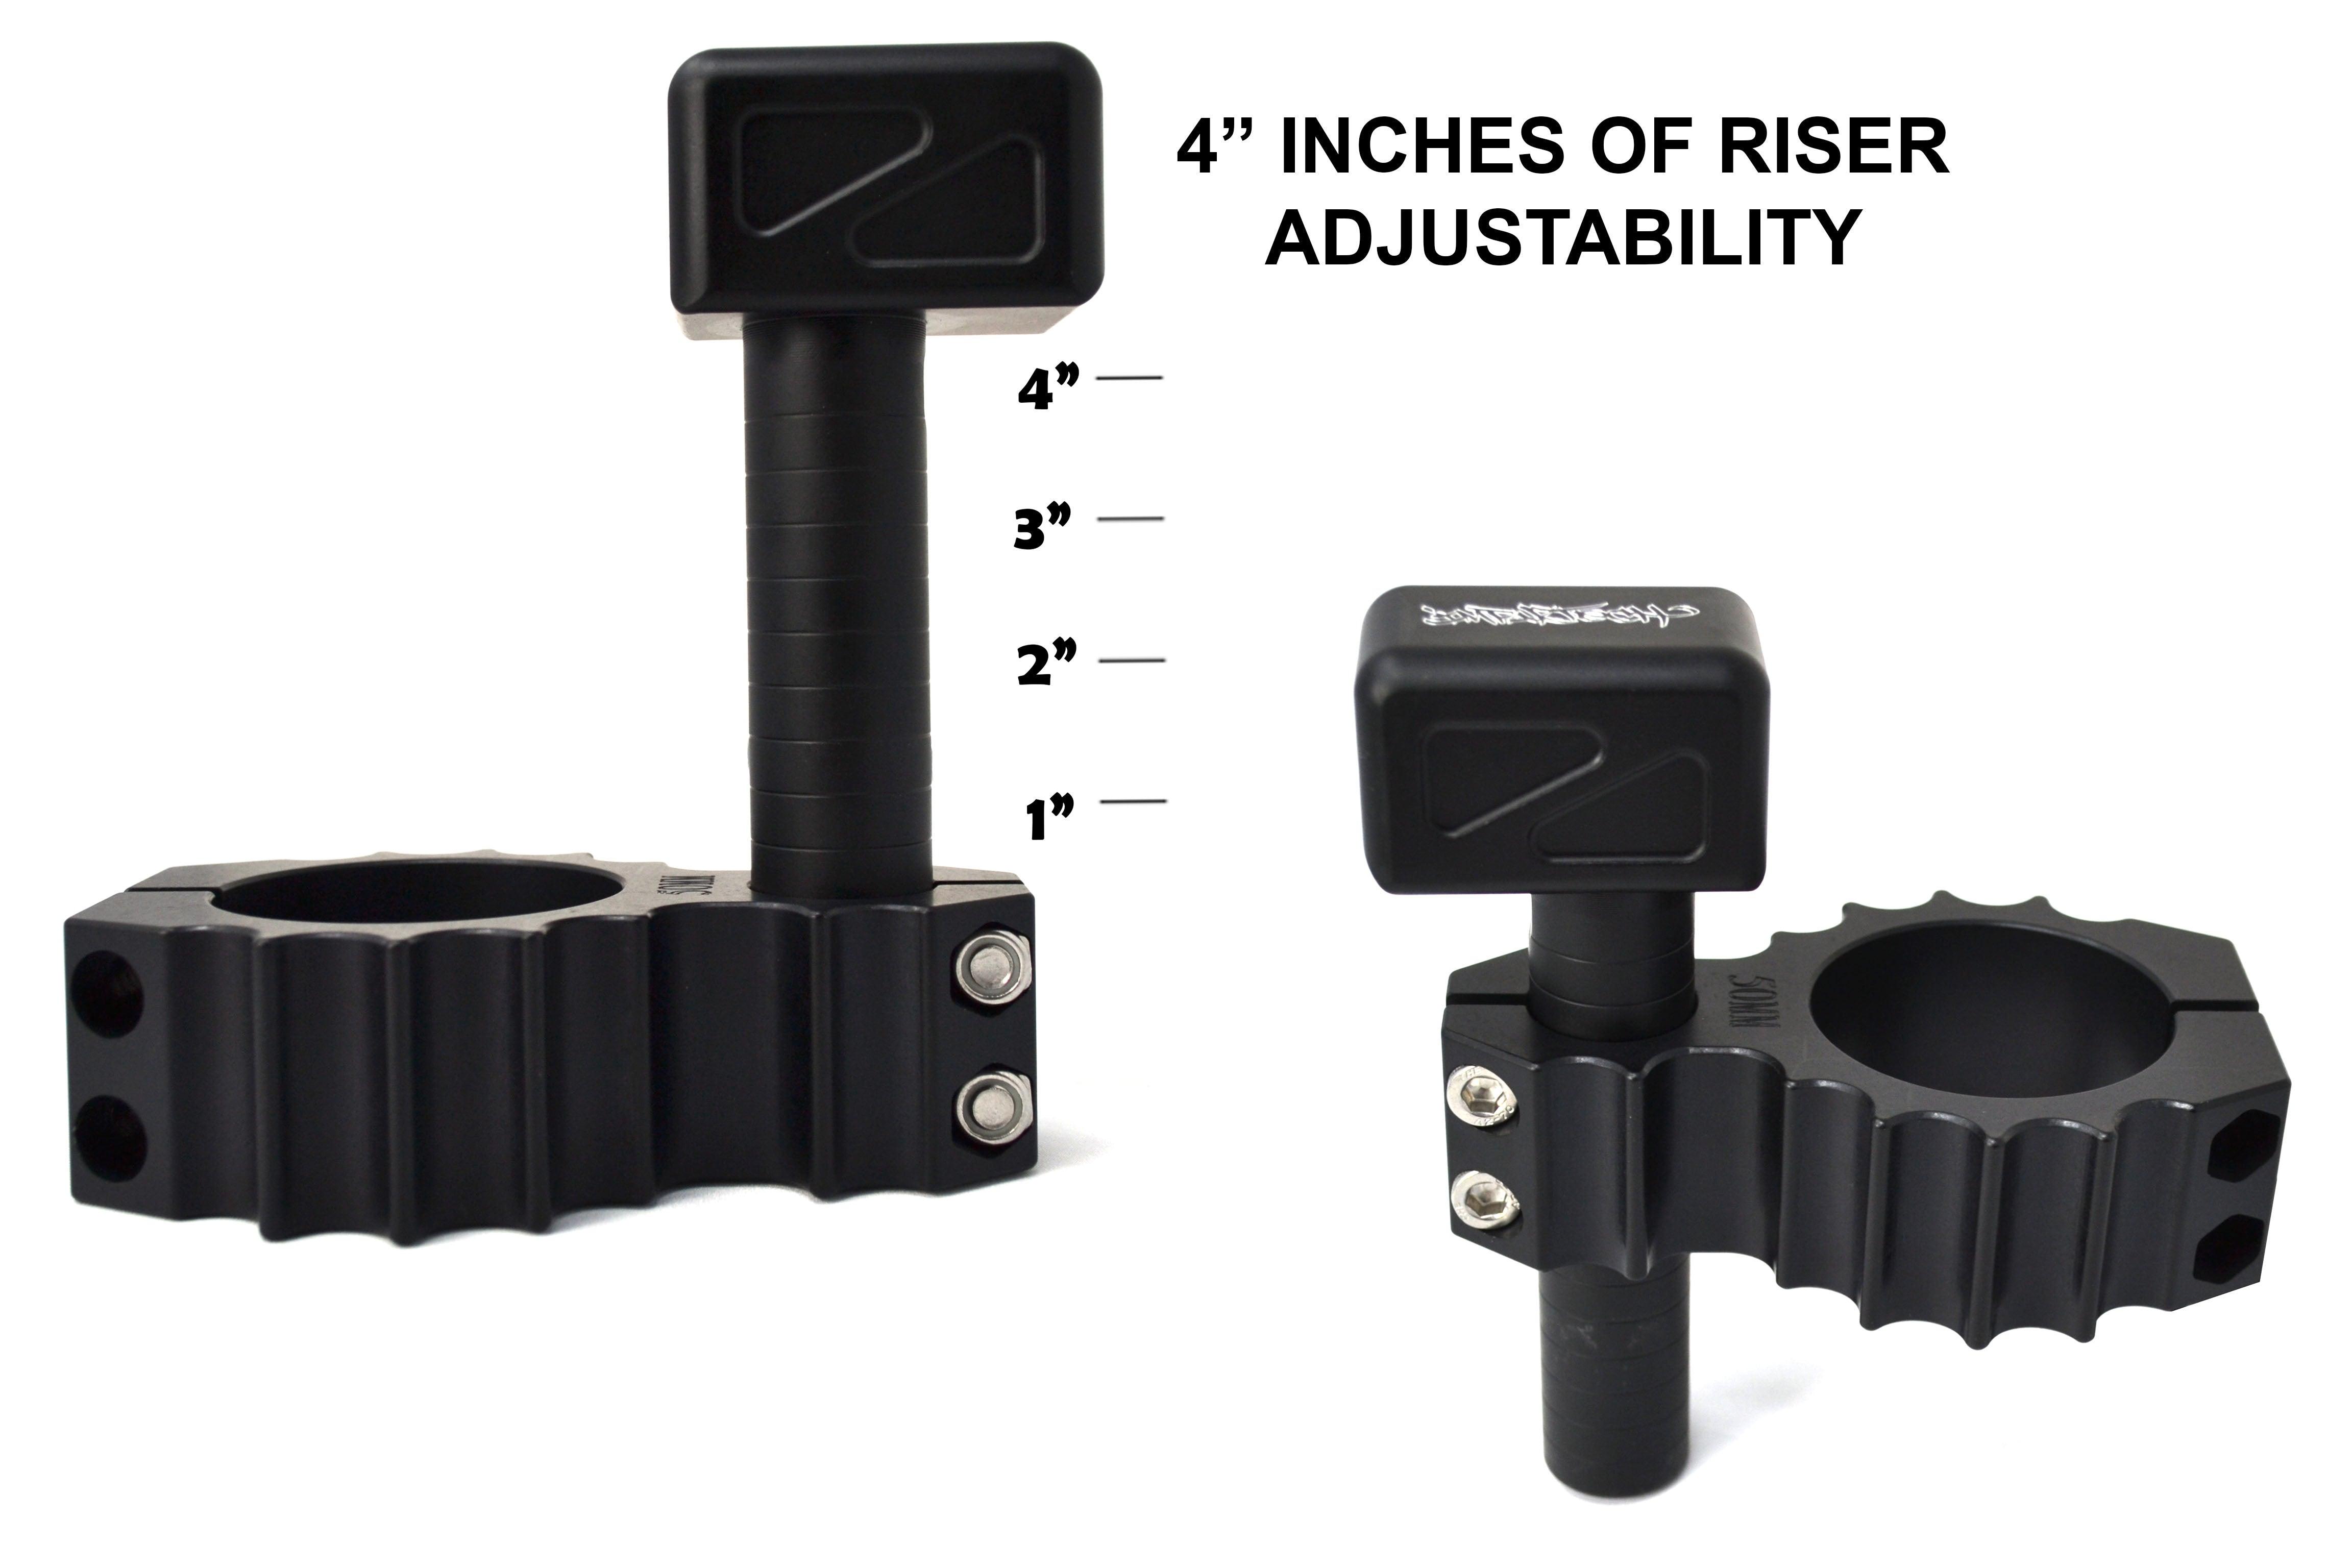 CLIP-ON RISERS - ImpakTech